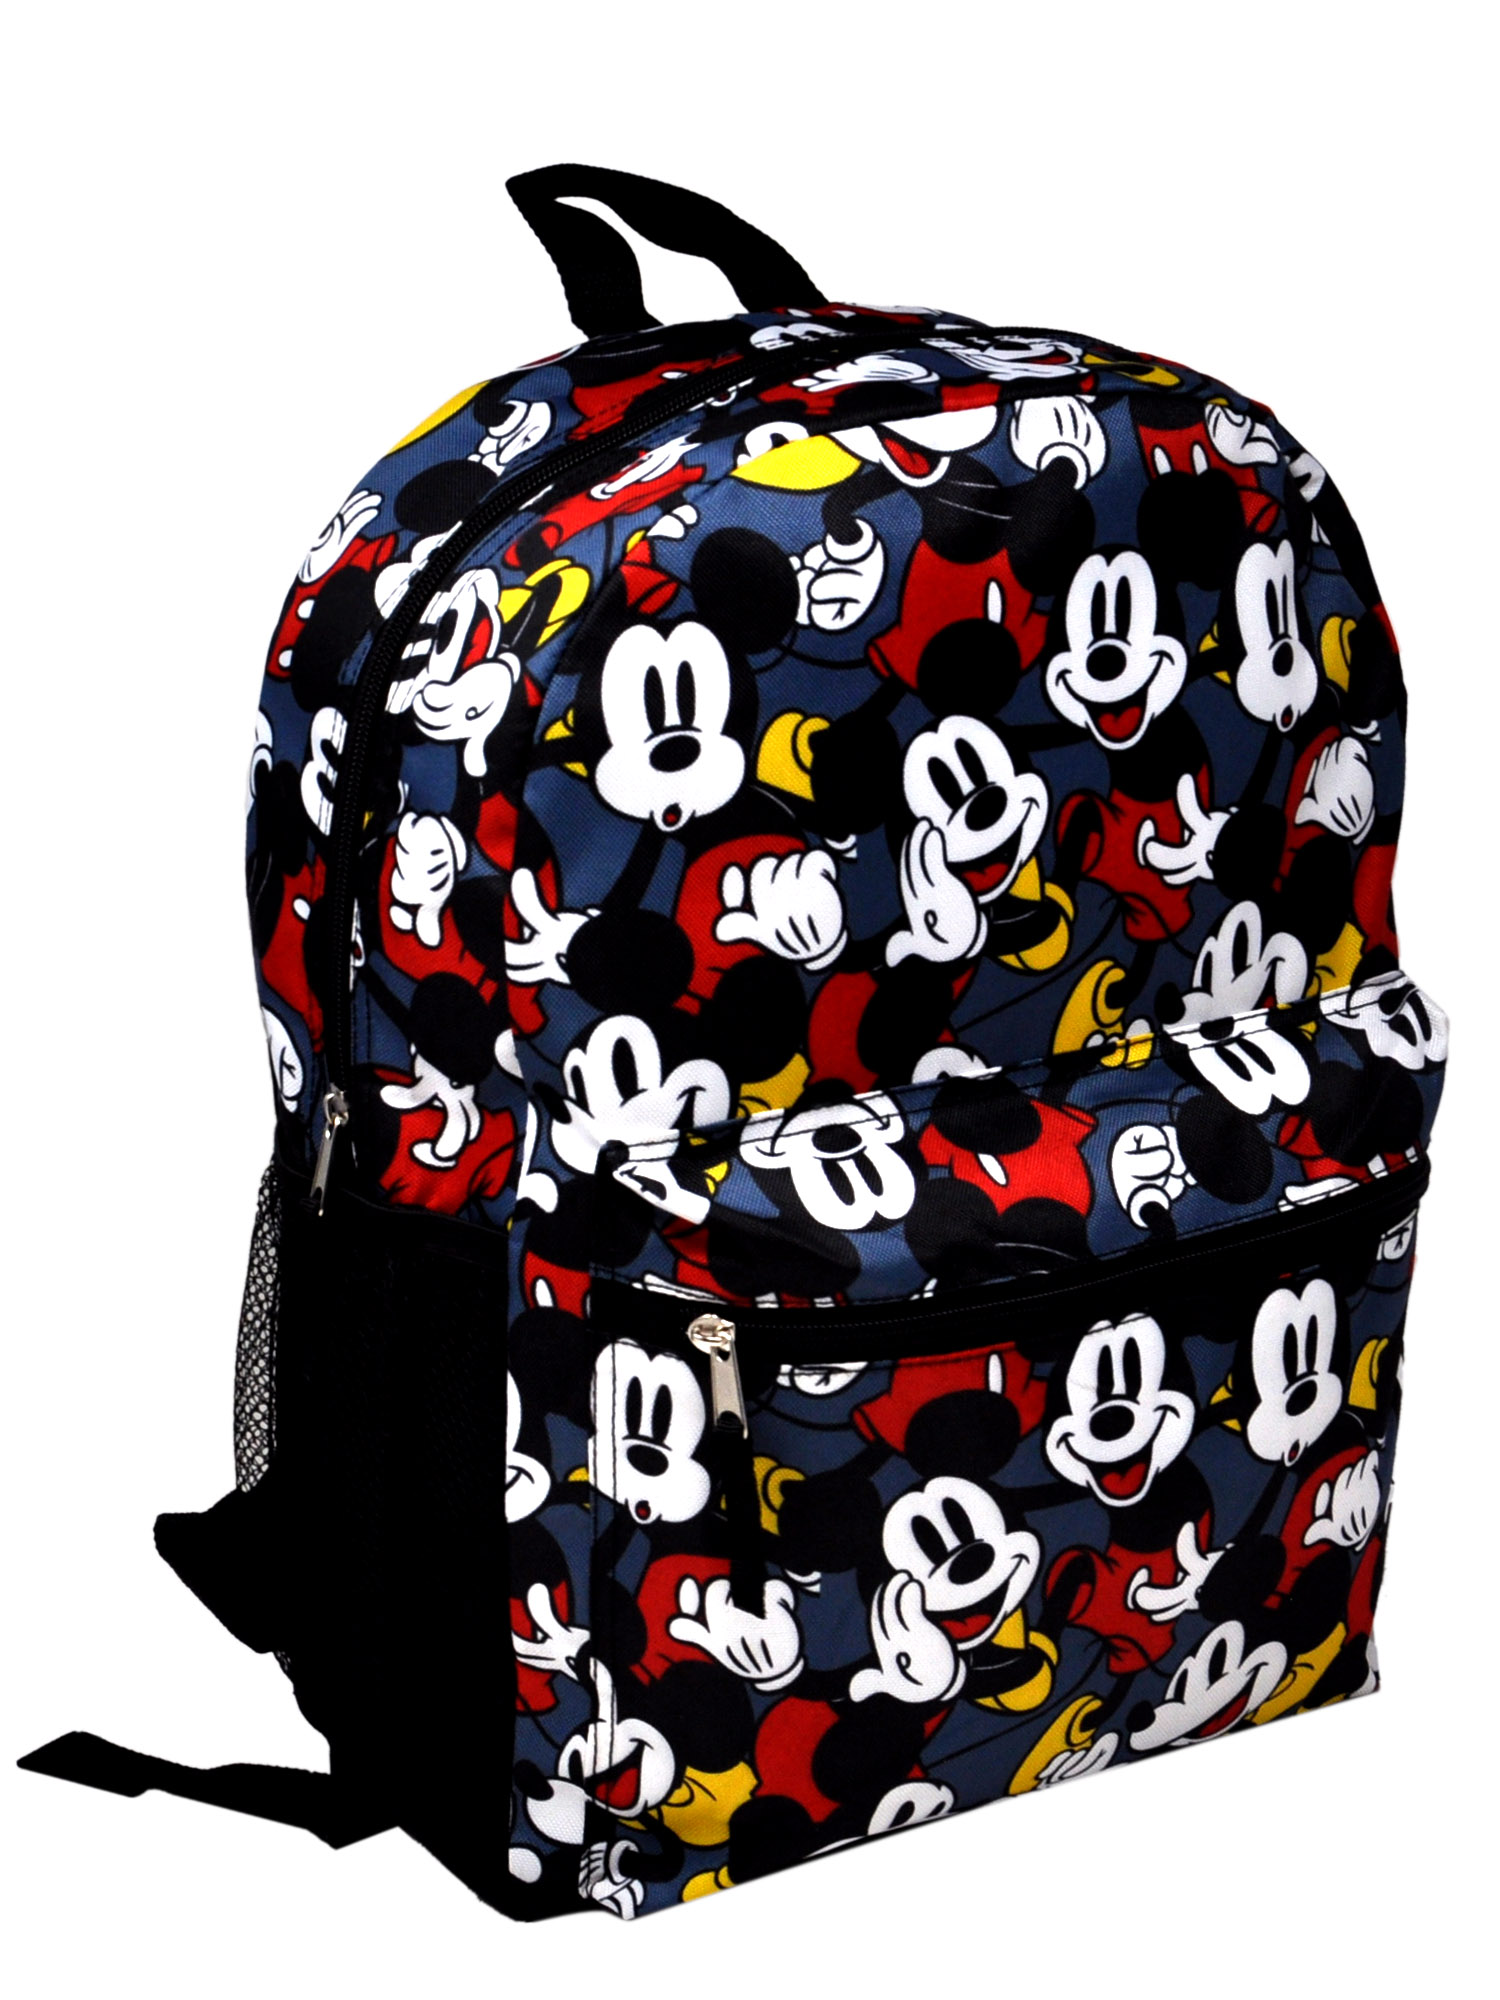 Disney Mickey Mouse Backpack 16" All-over Print Classic Front & Side Pockets - image 2 of 6